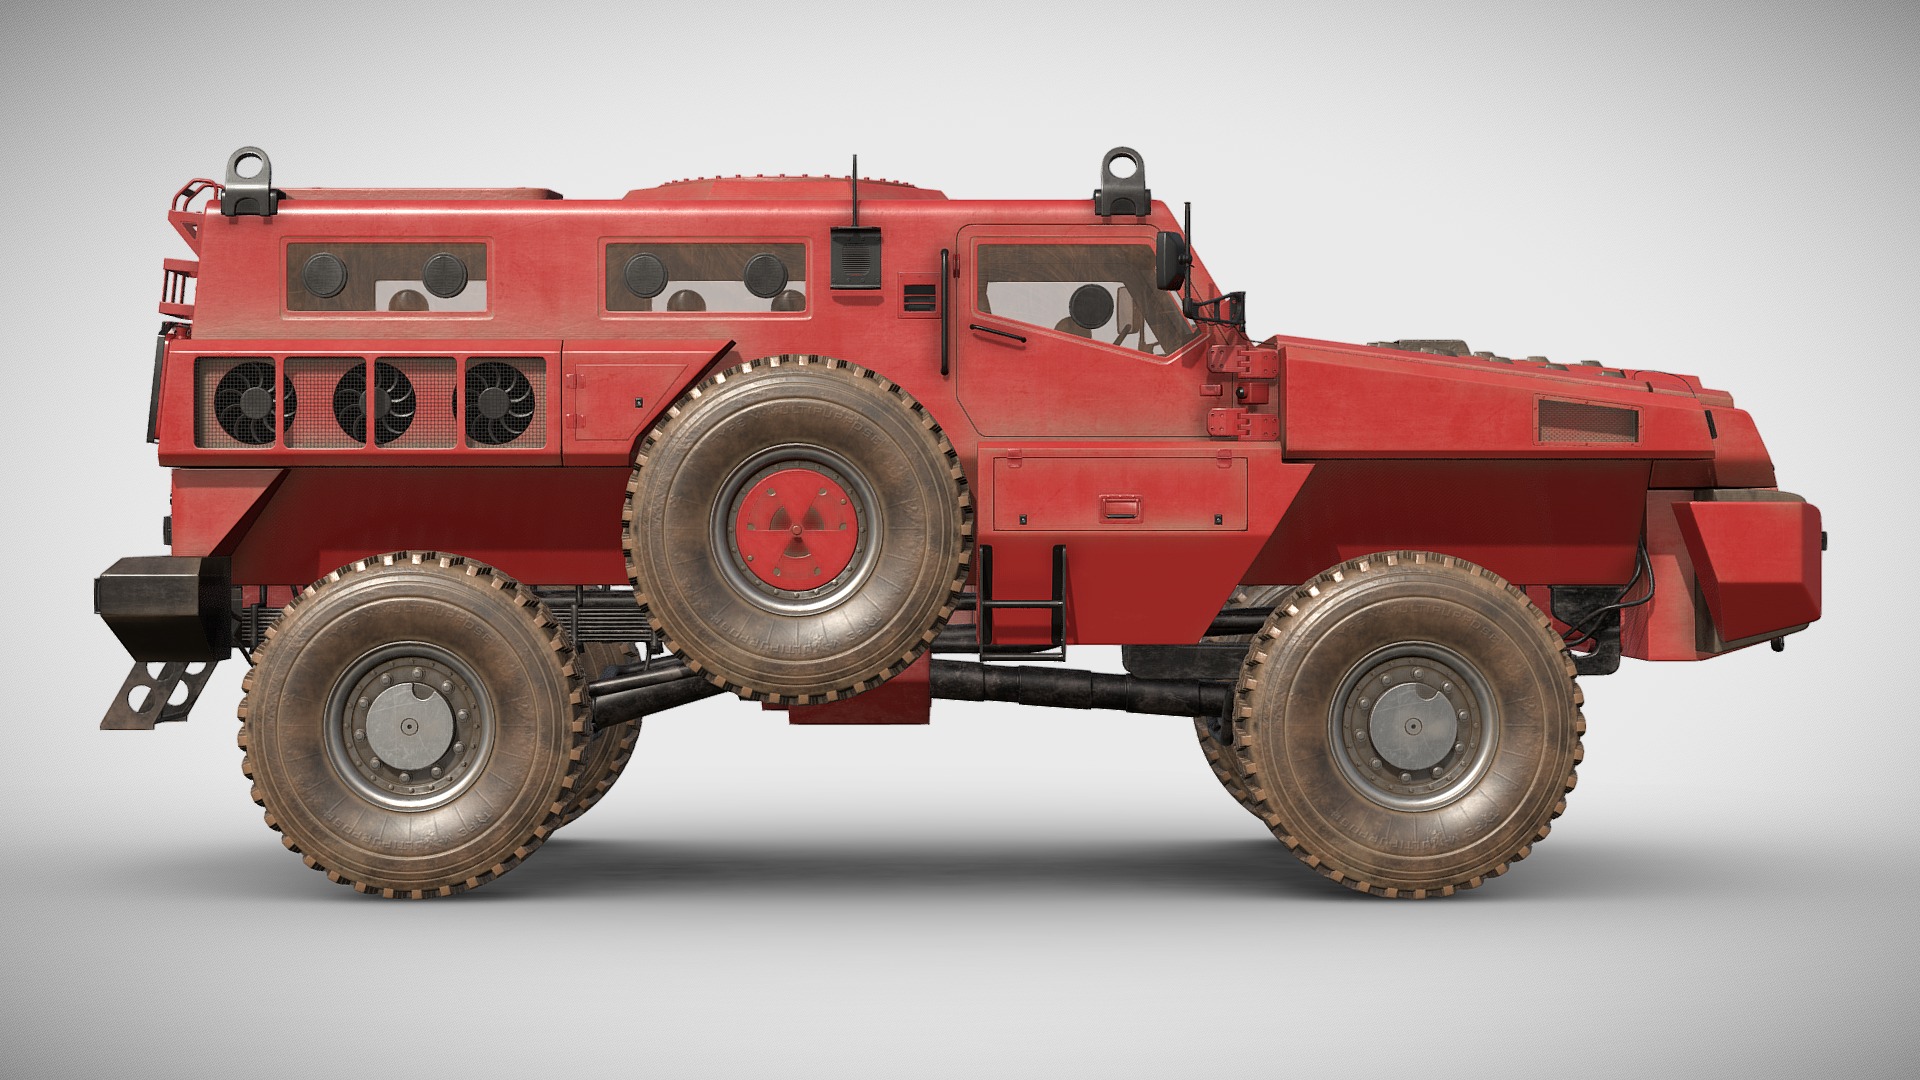 3D model Paramount Marauder - This is a 3D model of the Paramount Marauder. The 3D model is about a red toy truck.